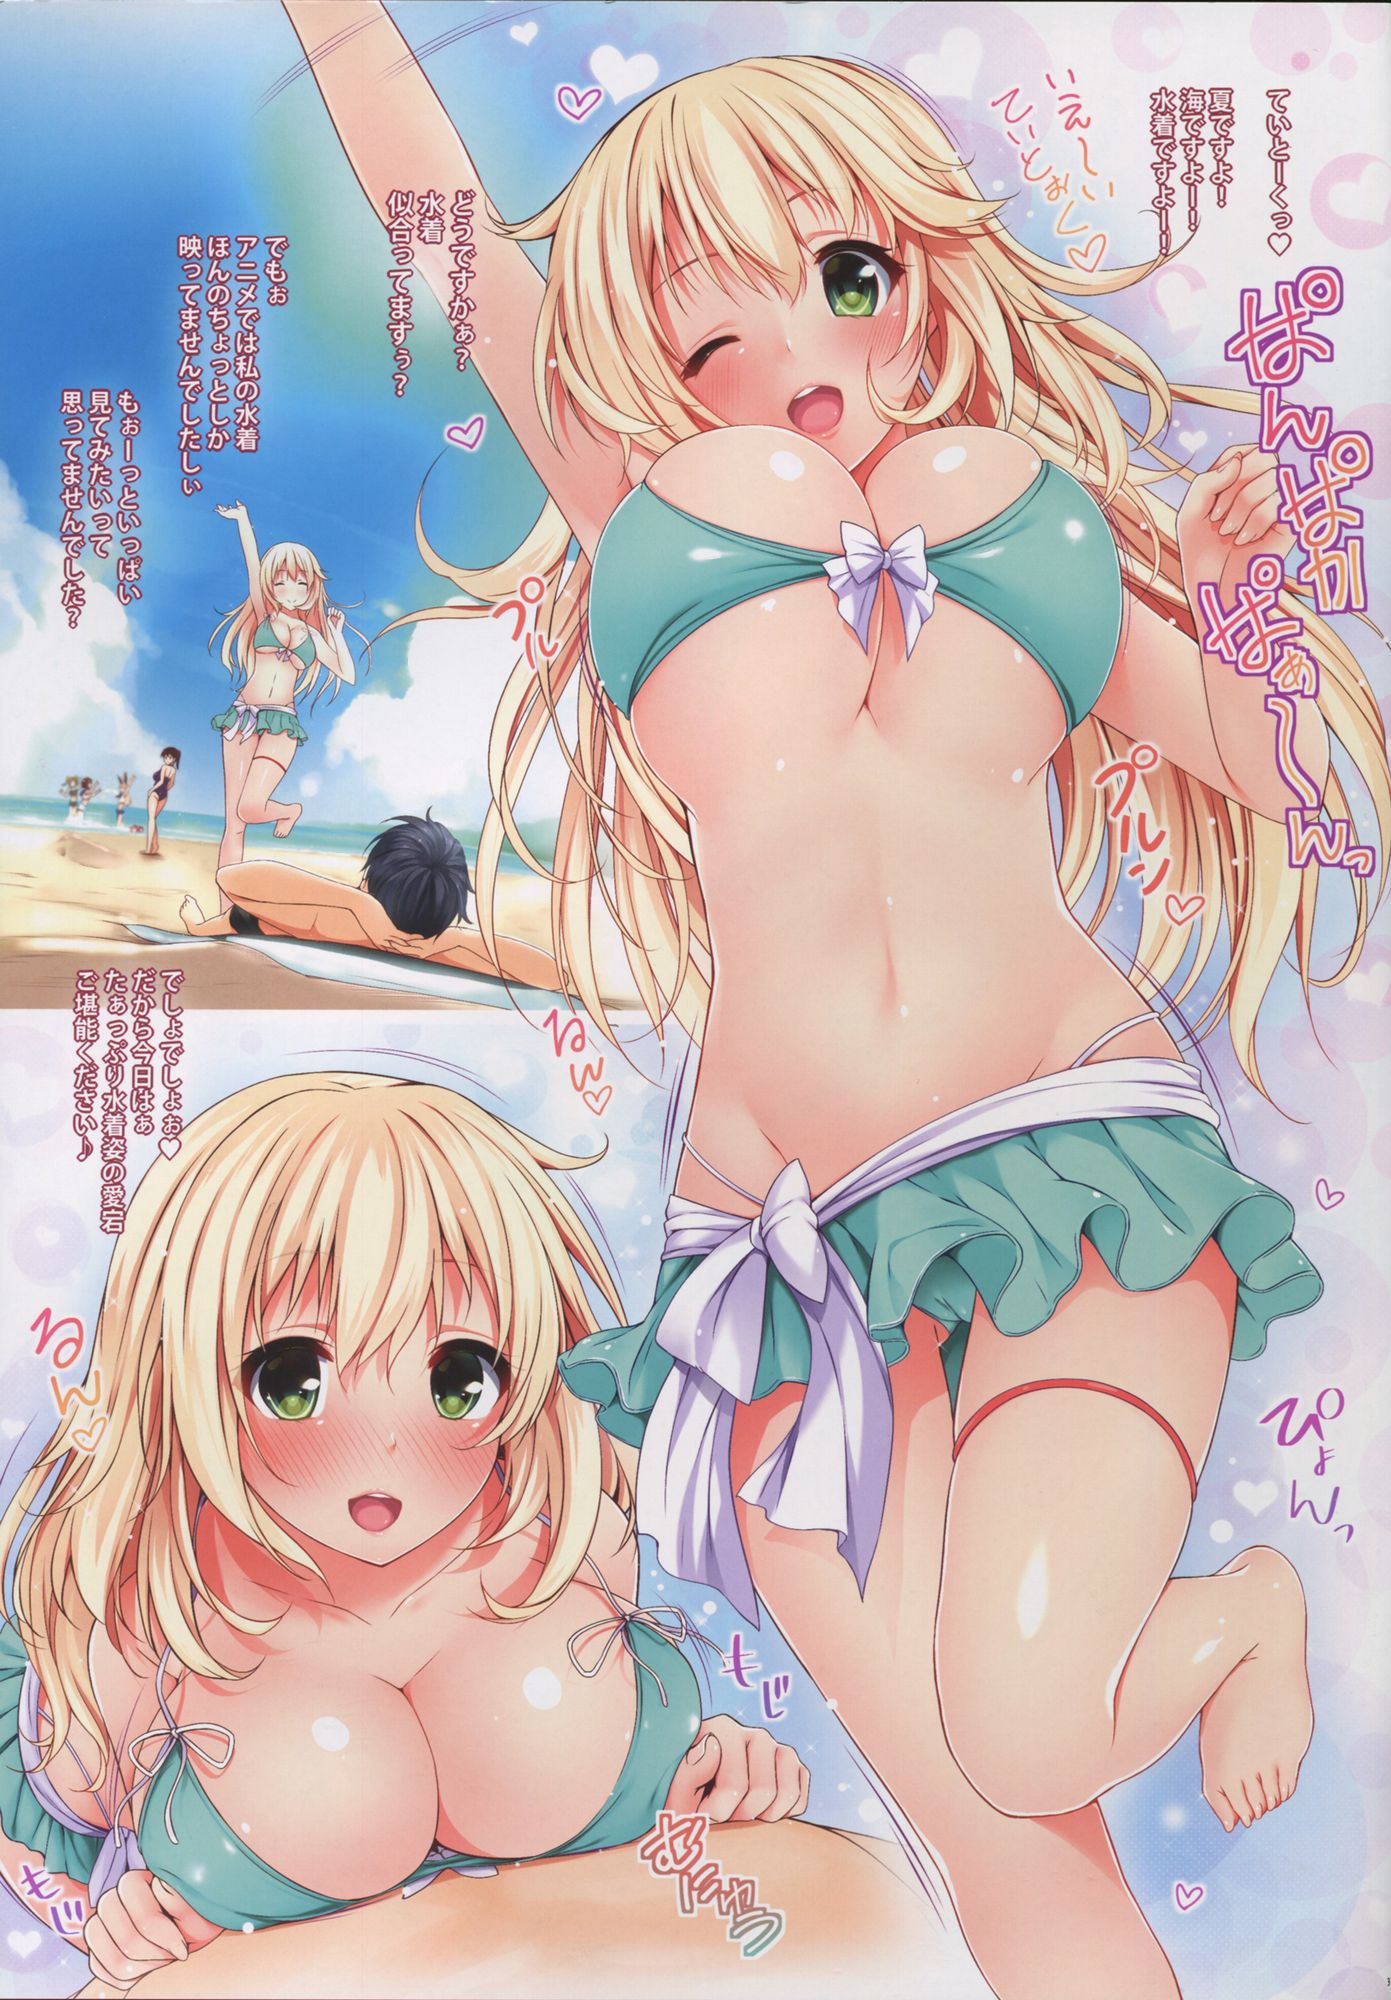 Swimsuit I want to see the image of swimsuit I'm a lewd I'm I'm that cloth area 11